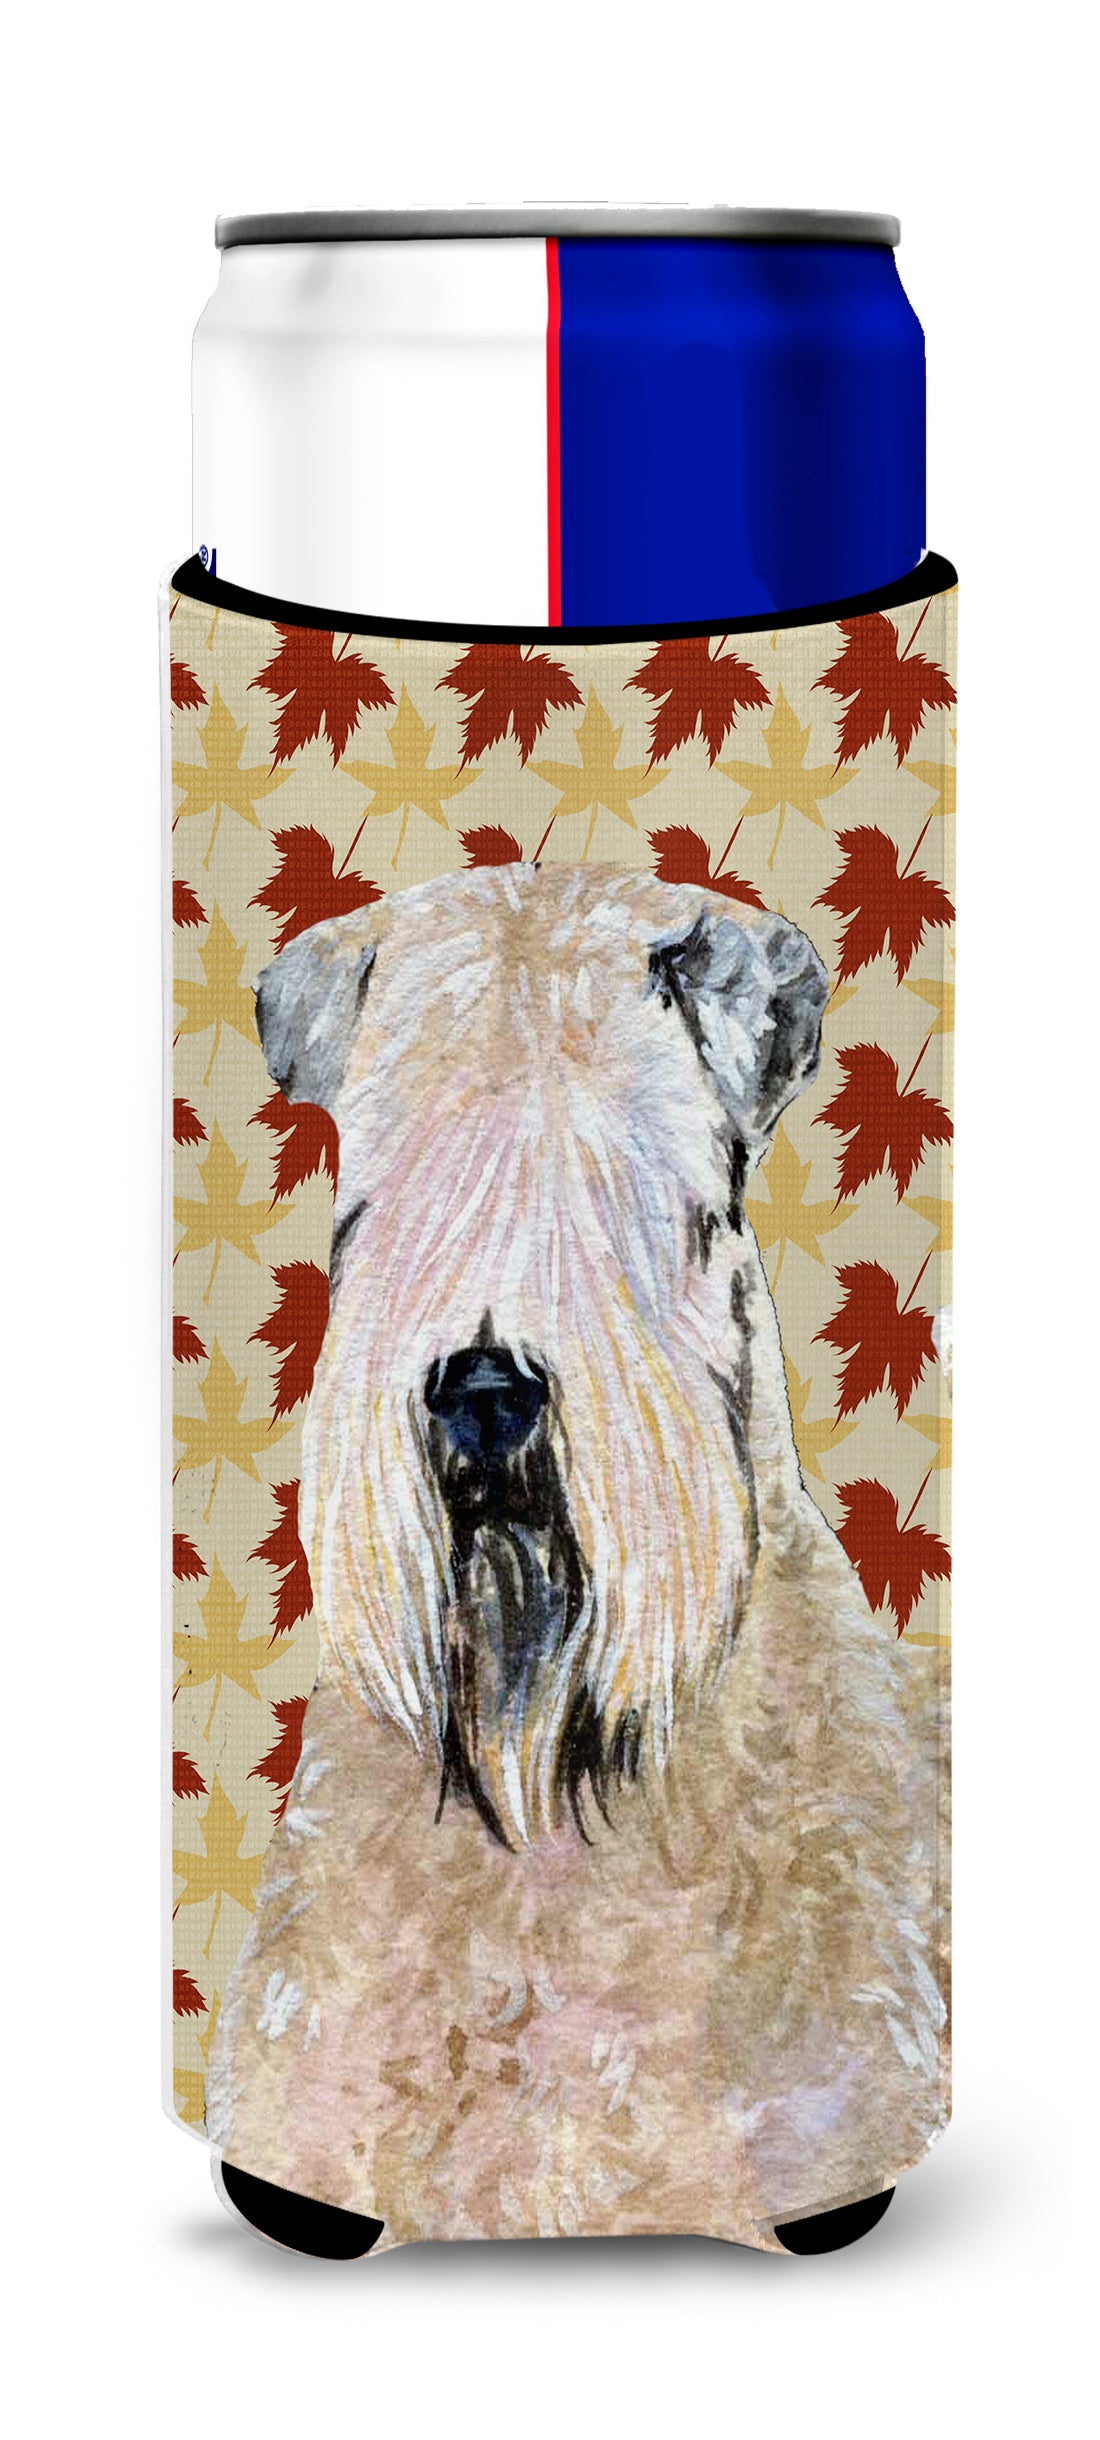 Wheaten Terrier Soft Coated Fall Leaves Portrait Ultra Beverage Insulators for slim cans SS4363MUK.